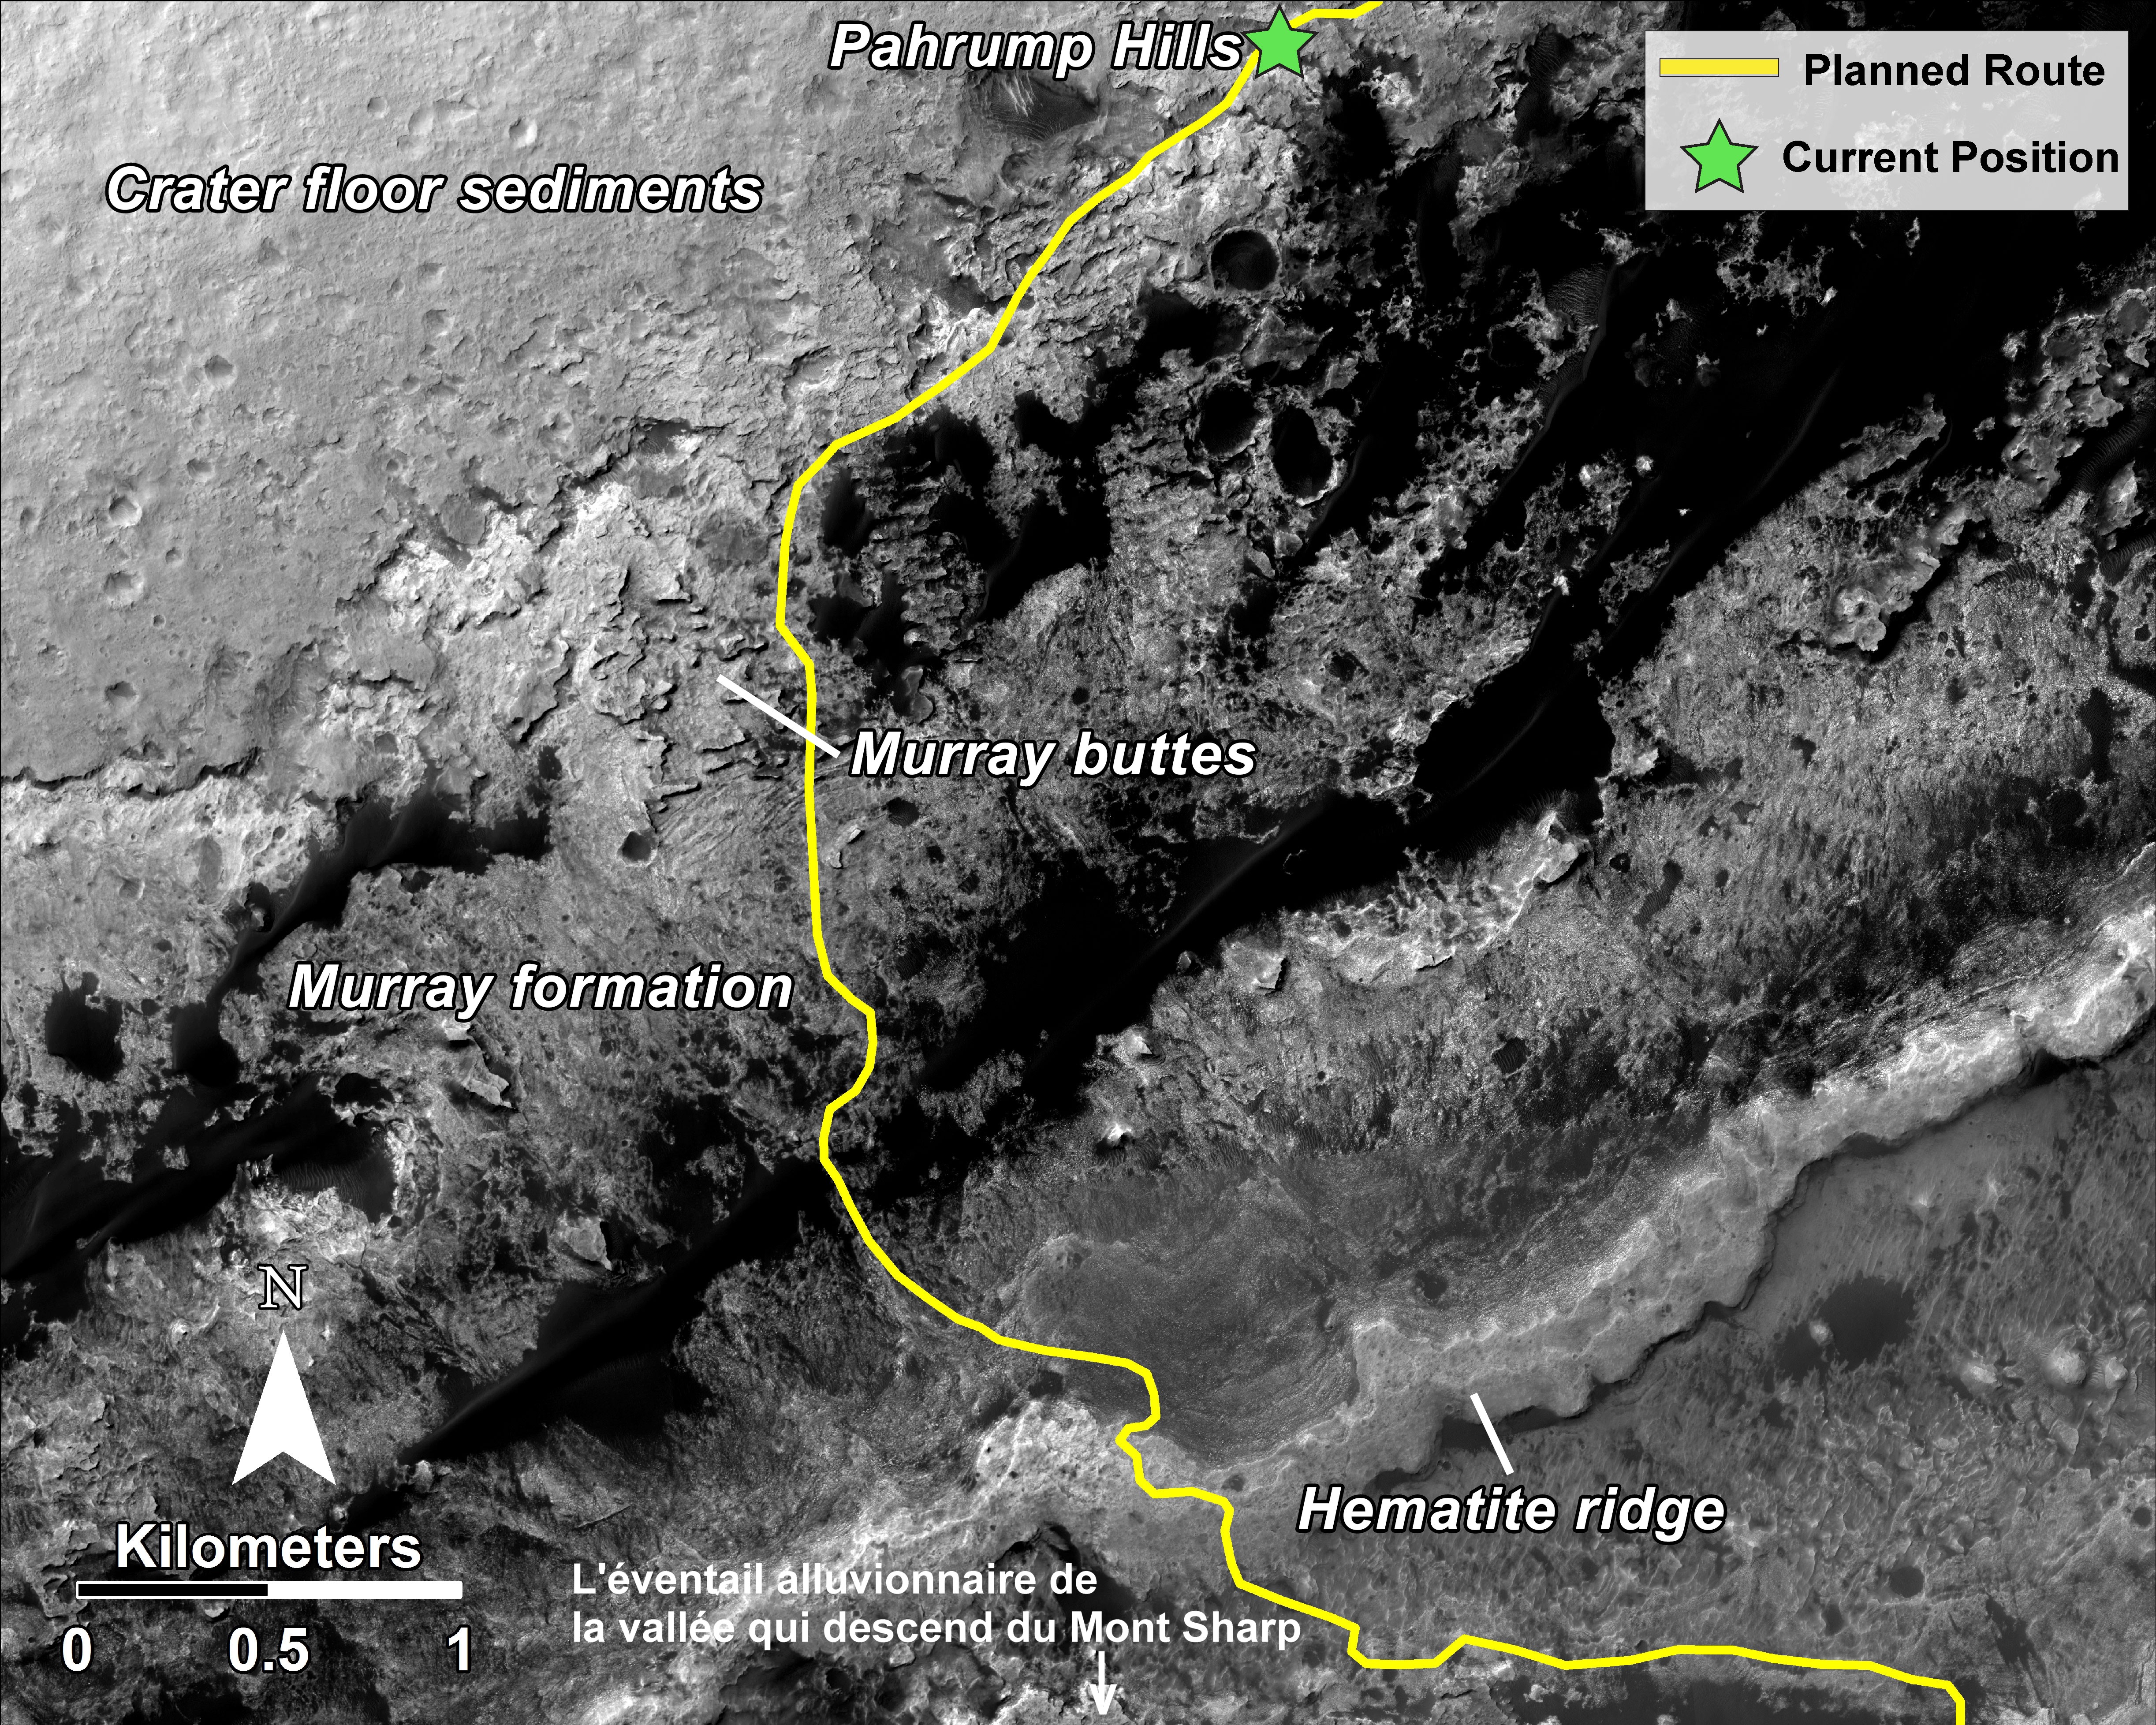 nasa-msl-mro-curiosity-rover-hirise-planned-route-map-pahrump-hills-to-mount-sharp-pia18780-full renseigné